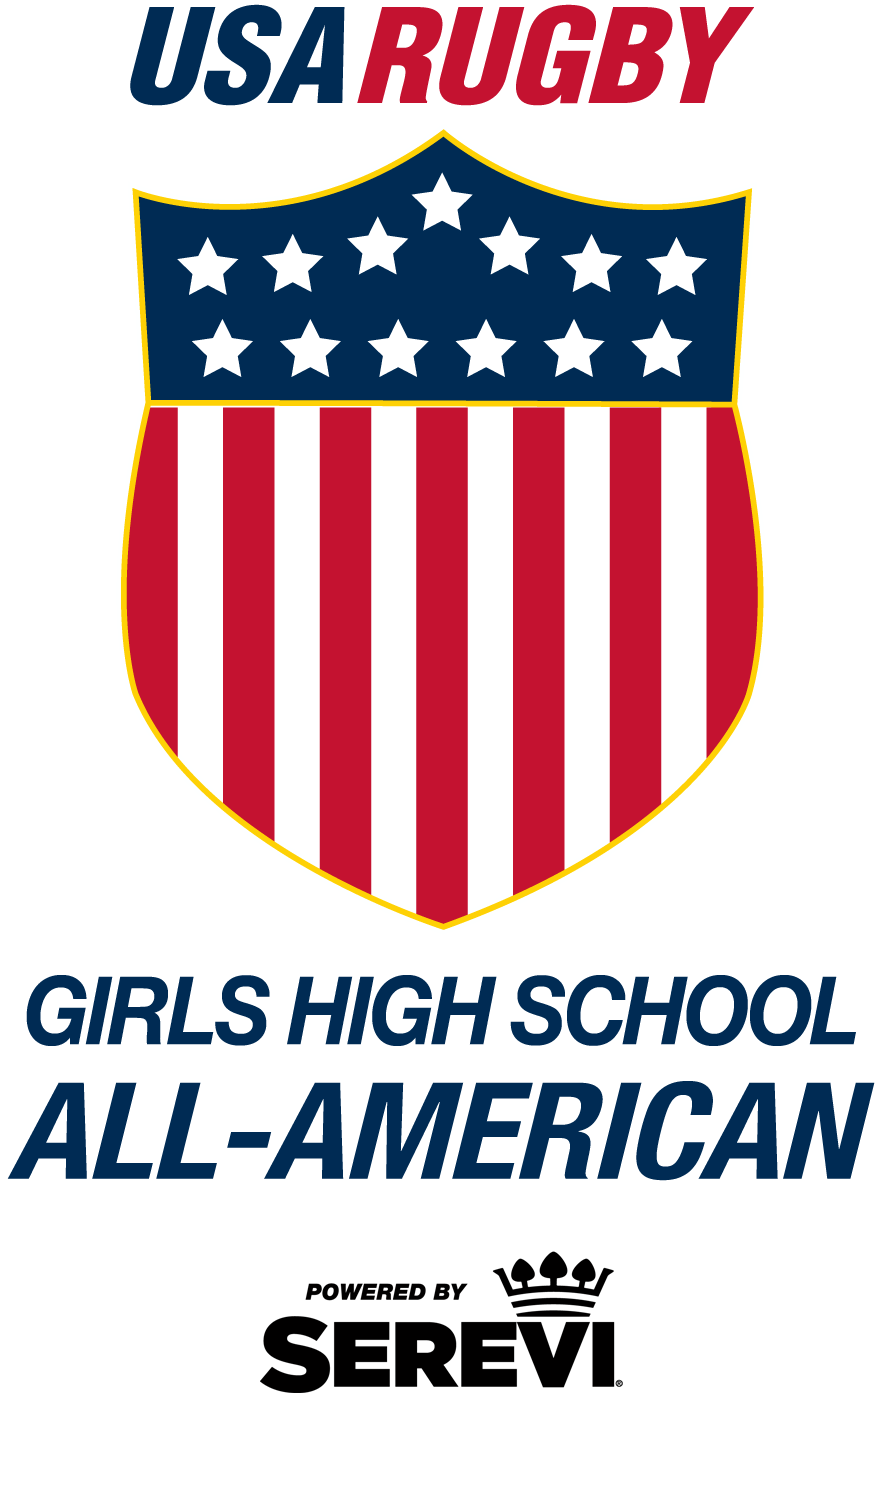 America clipart all american. Usa rugby announces girls